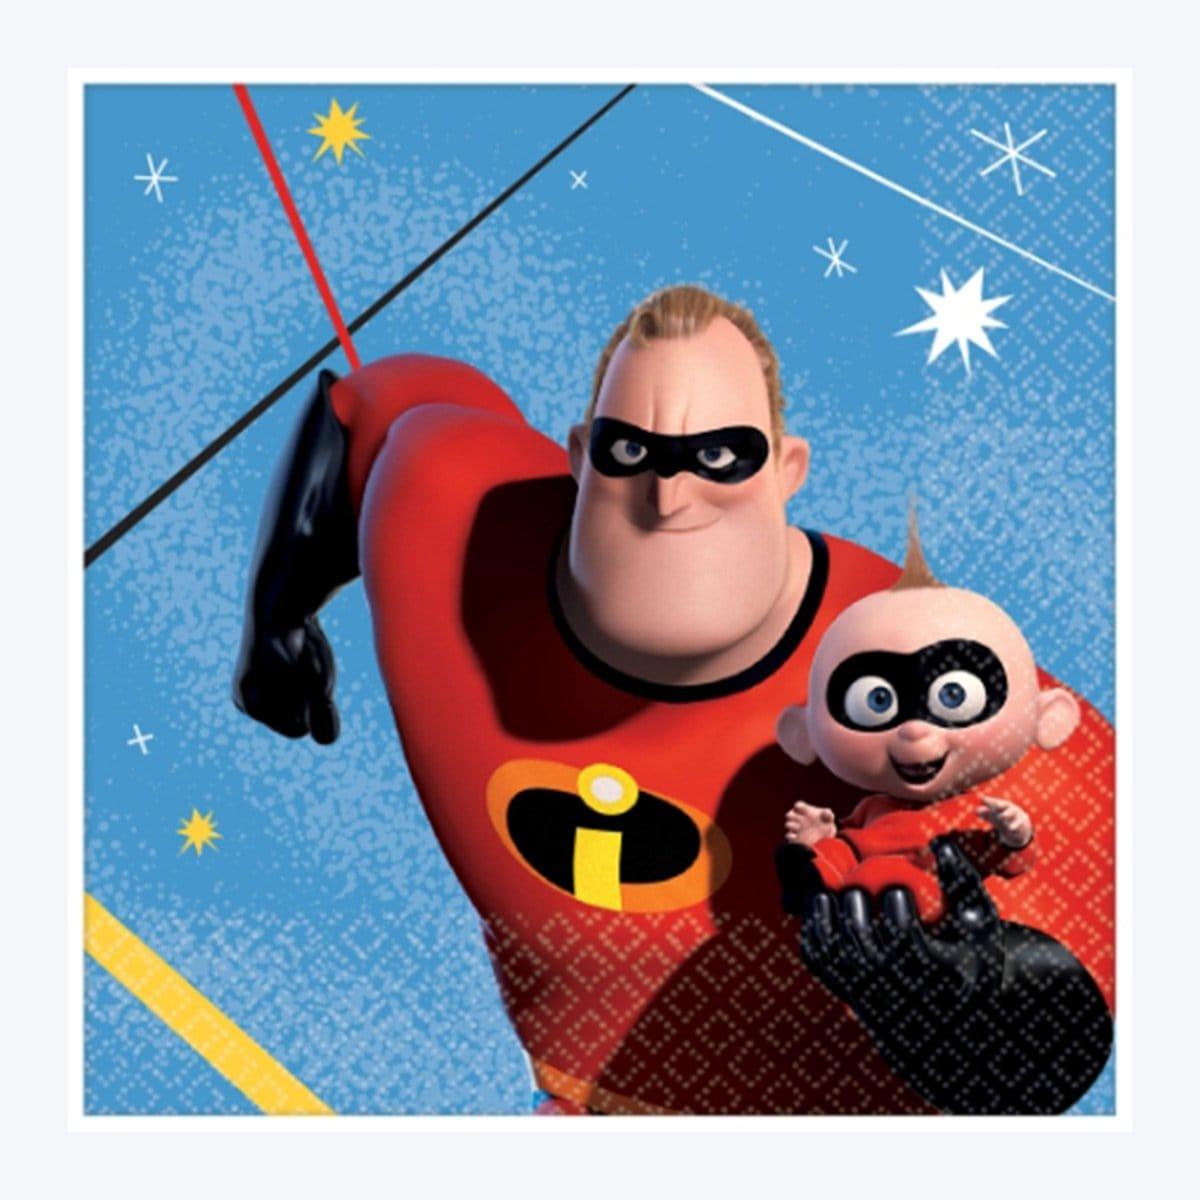 Buy Kids Birthday Incredibles 2 beverage napkins, 16 per package sold at Party Expert